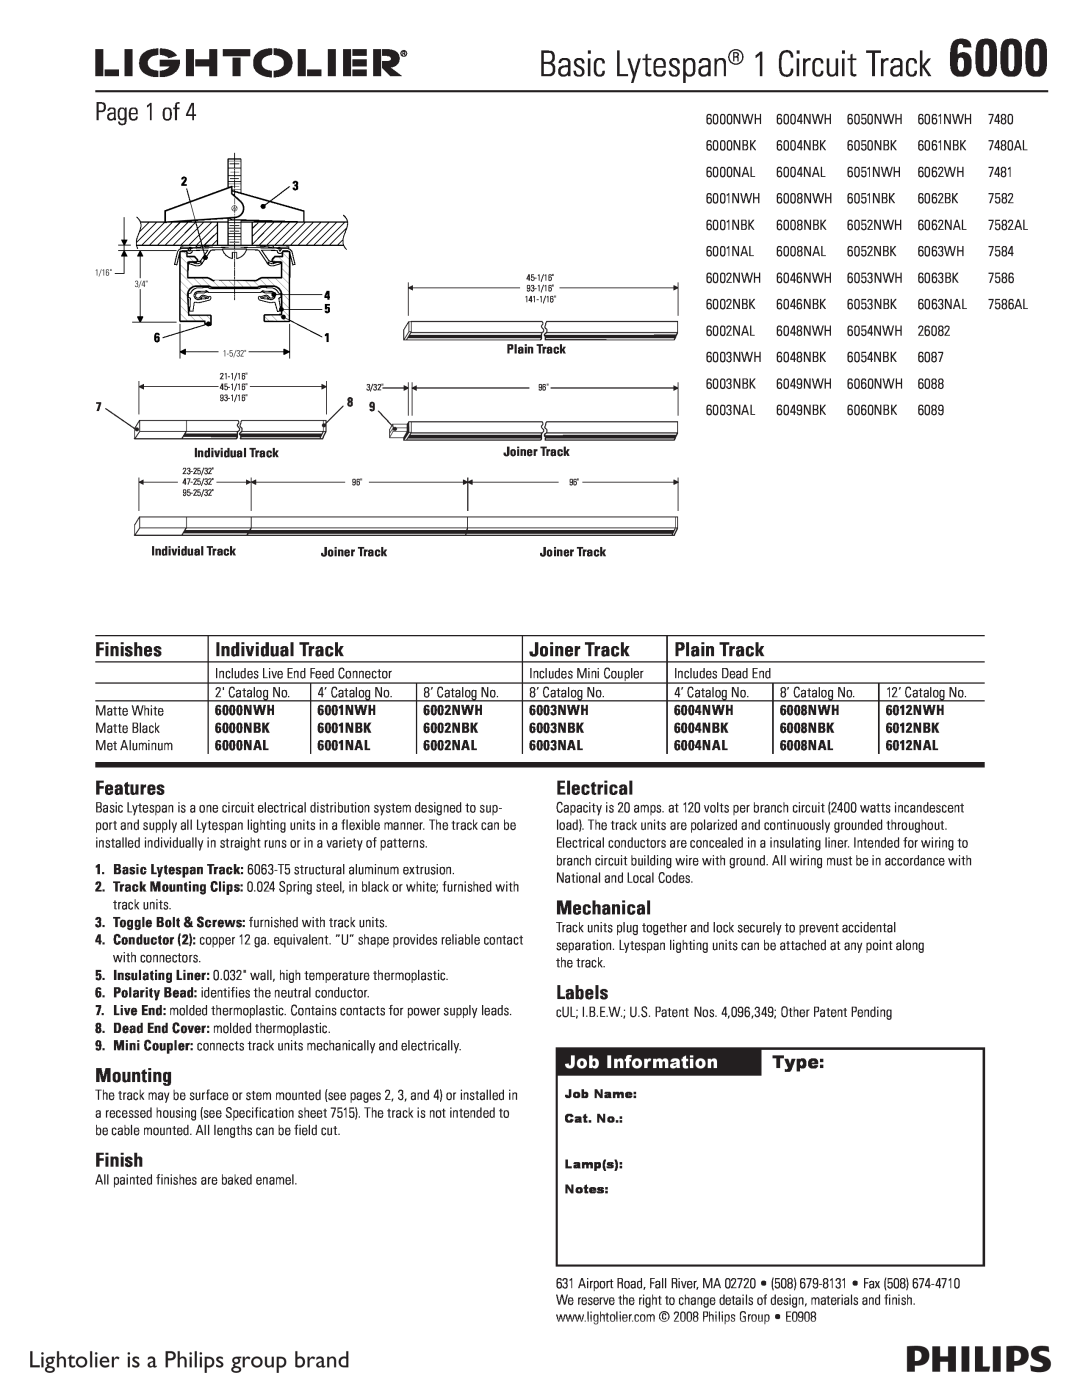 Lightolier 6000 specifications Page 1 of, Lightolier is a Philips group brand, Finishes, Individual Track, Joiner Track 